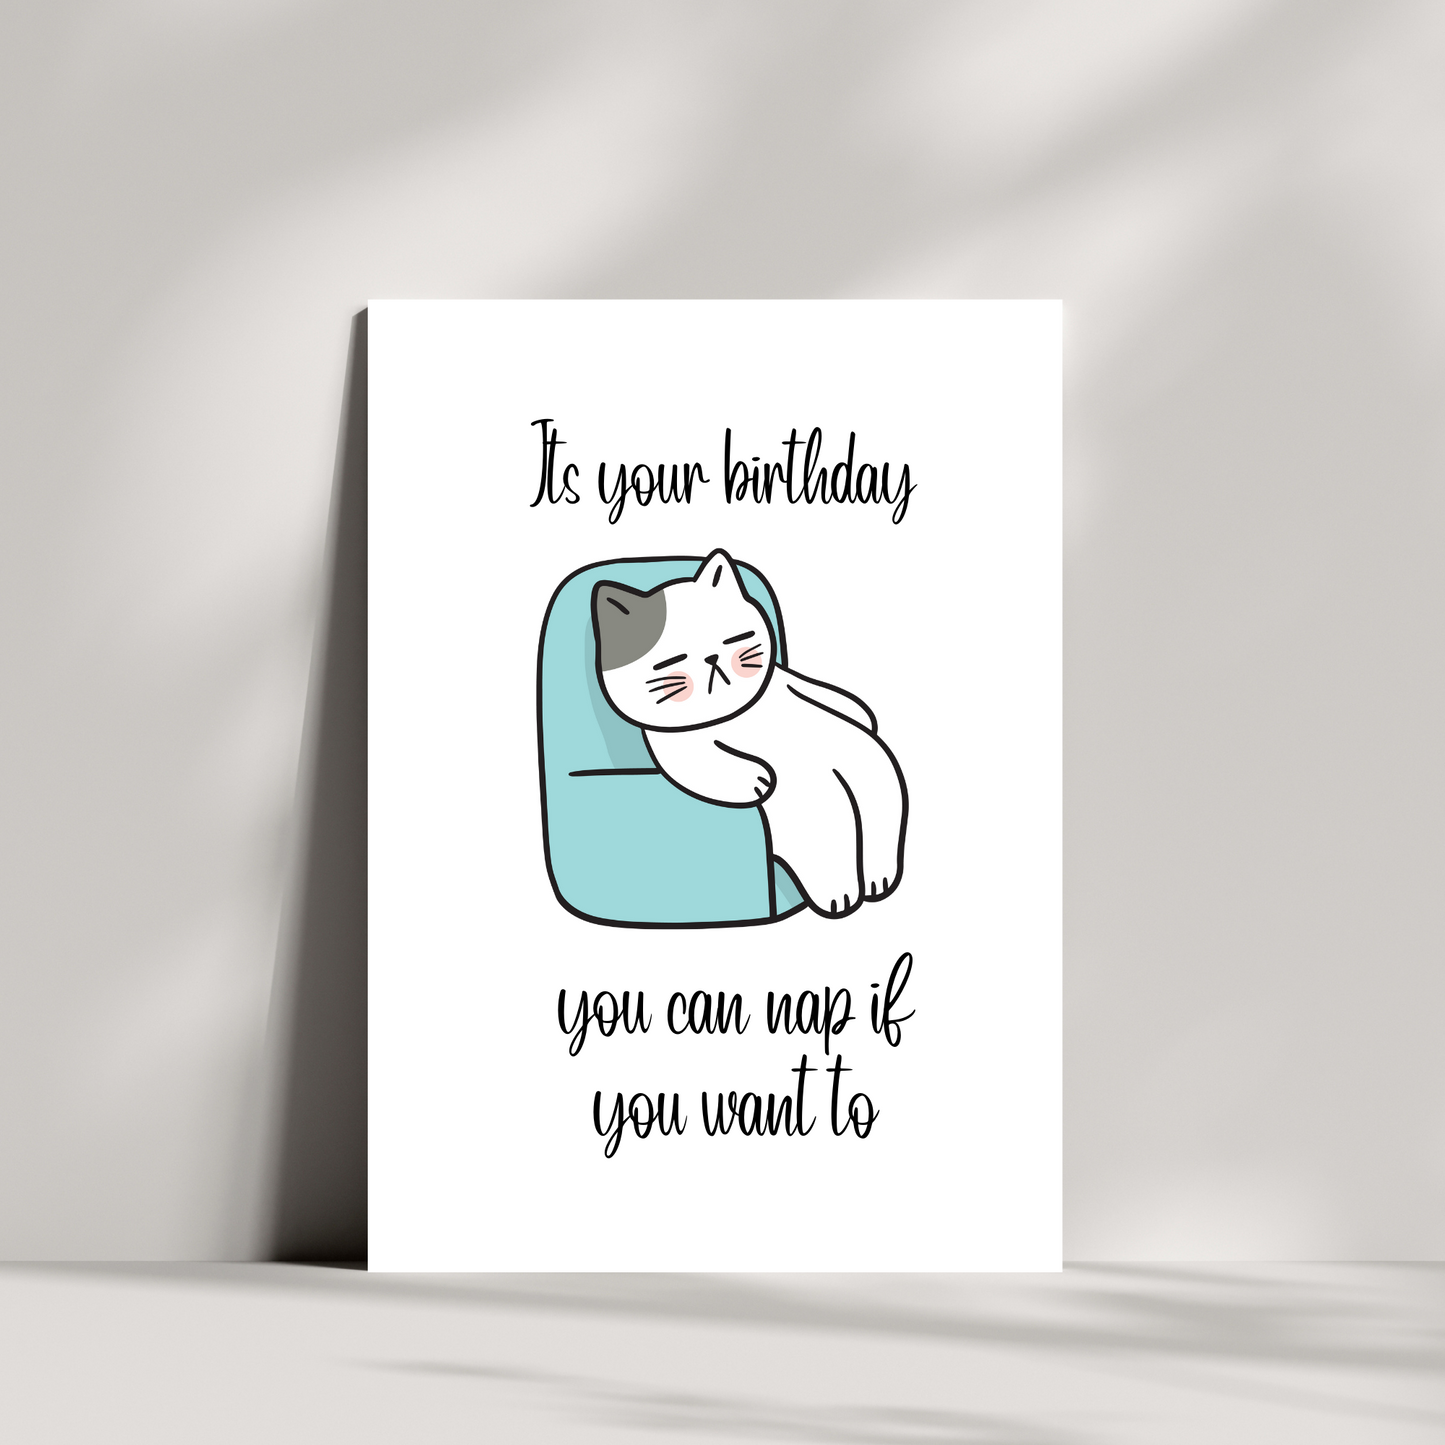 Its your birthday, you can nap if you want to cat Birthday card